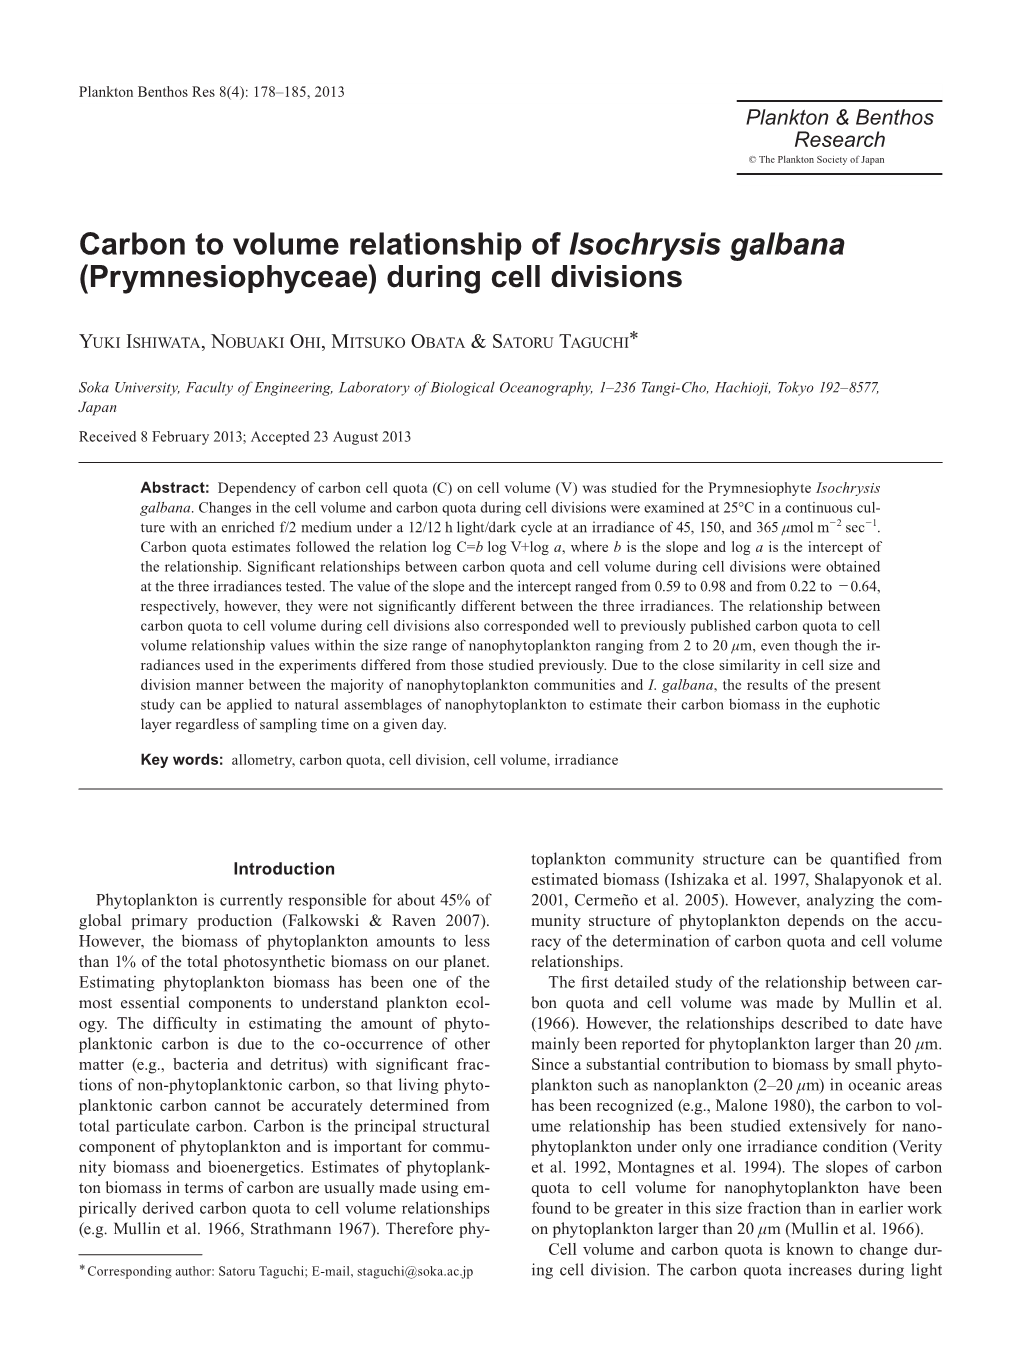 Carbon to Volume Relationship of Isochrysis Galbana (Prymnesiophyceae) During Cell Divisions